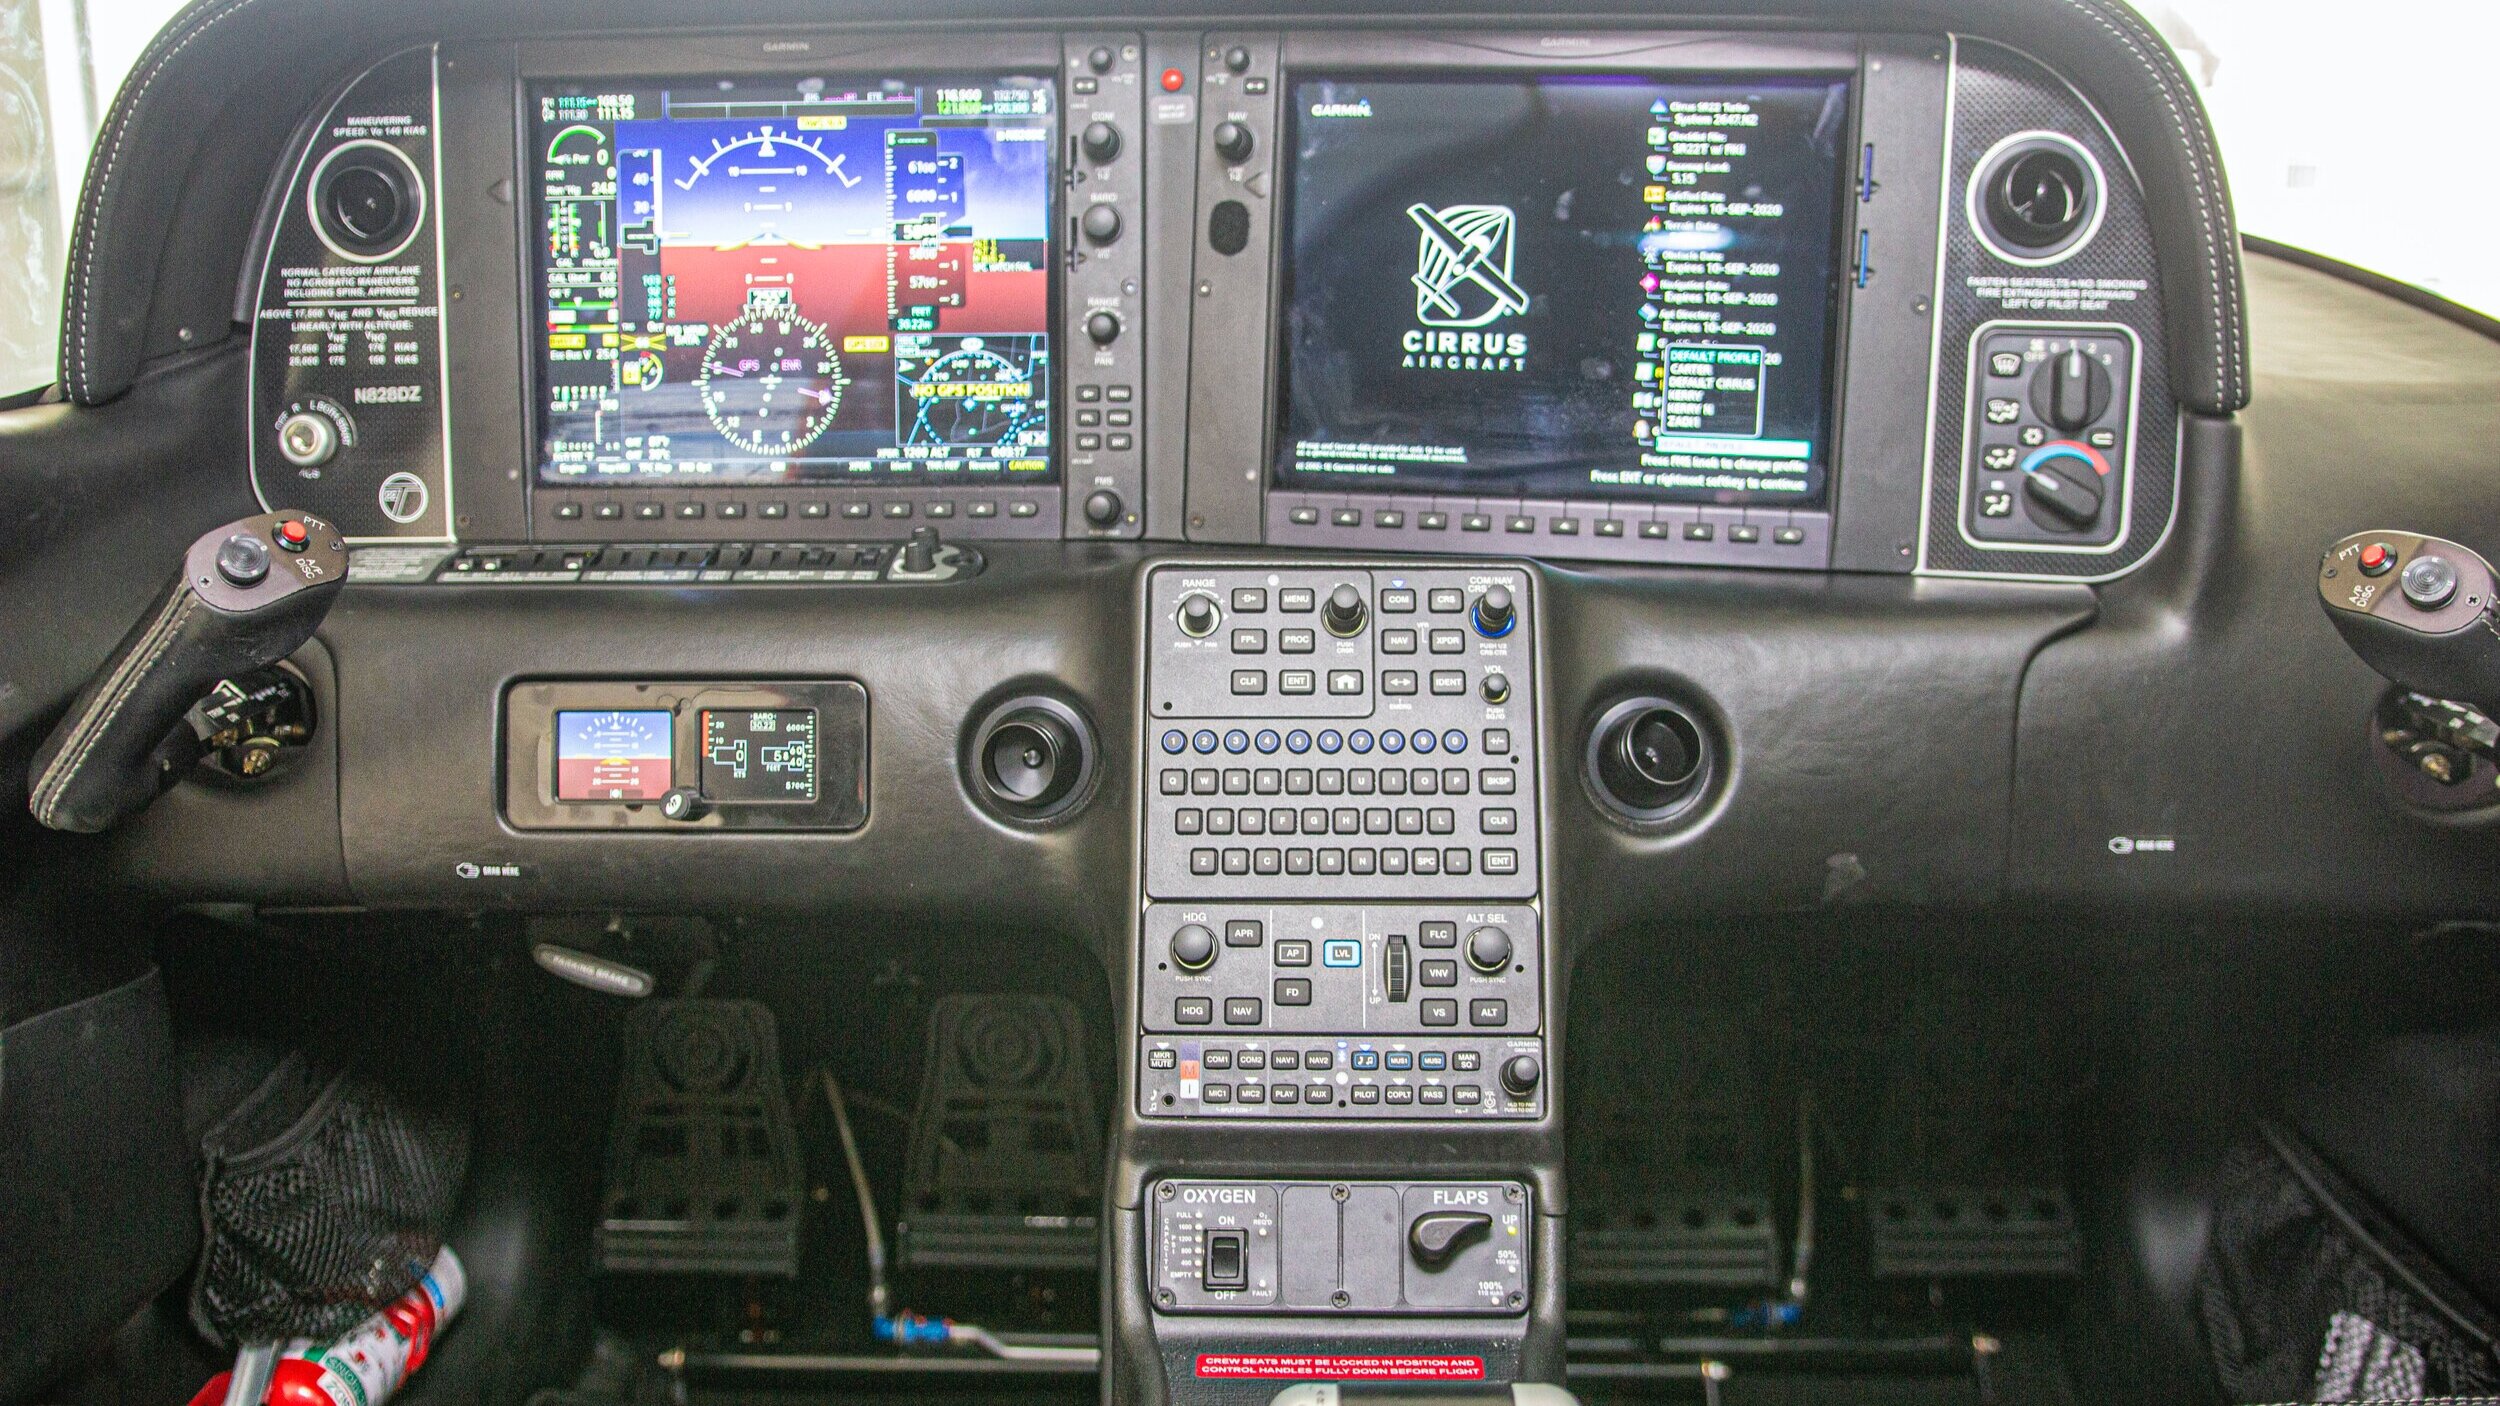 N828DZ | Cirrus Perspective+ Avionics with QWERTY Keyboard on the FMS makes data entry and planning a snap!